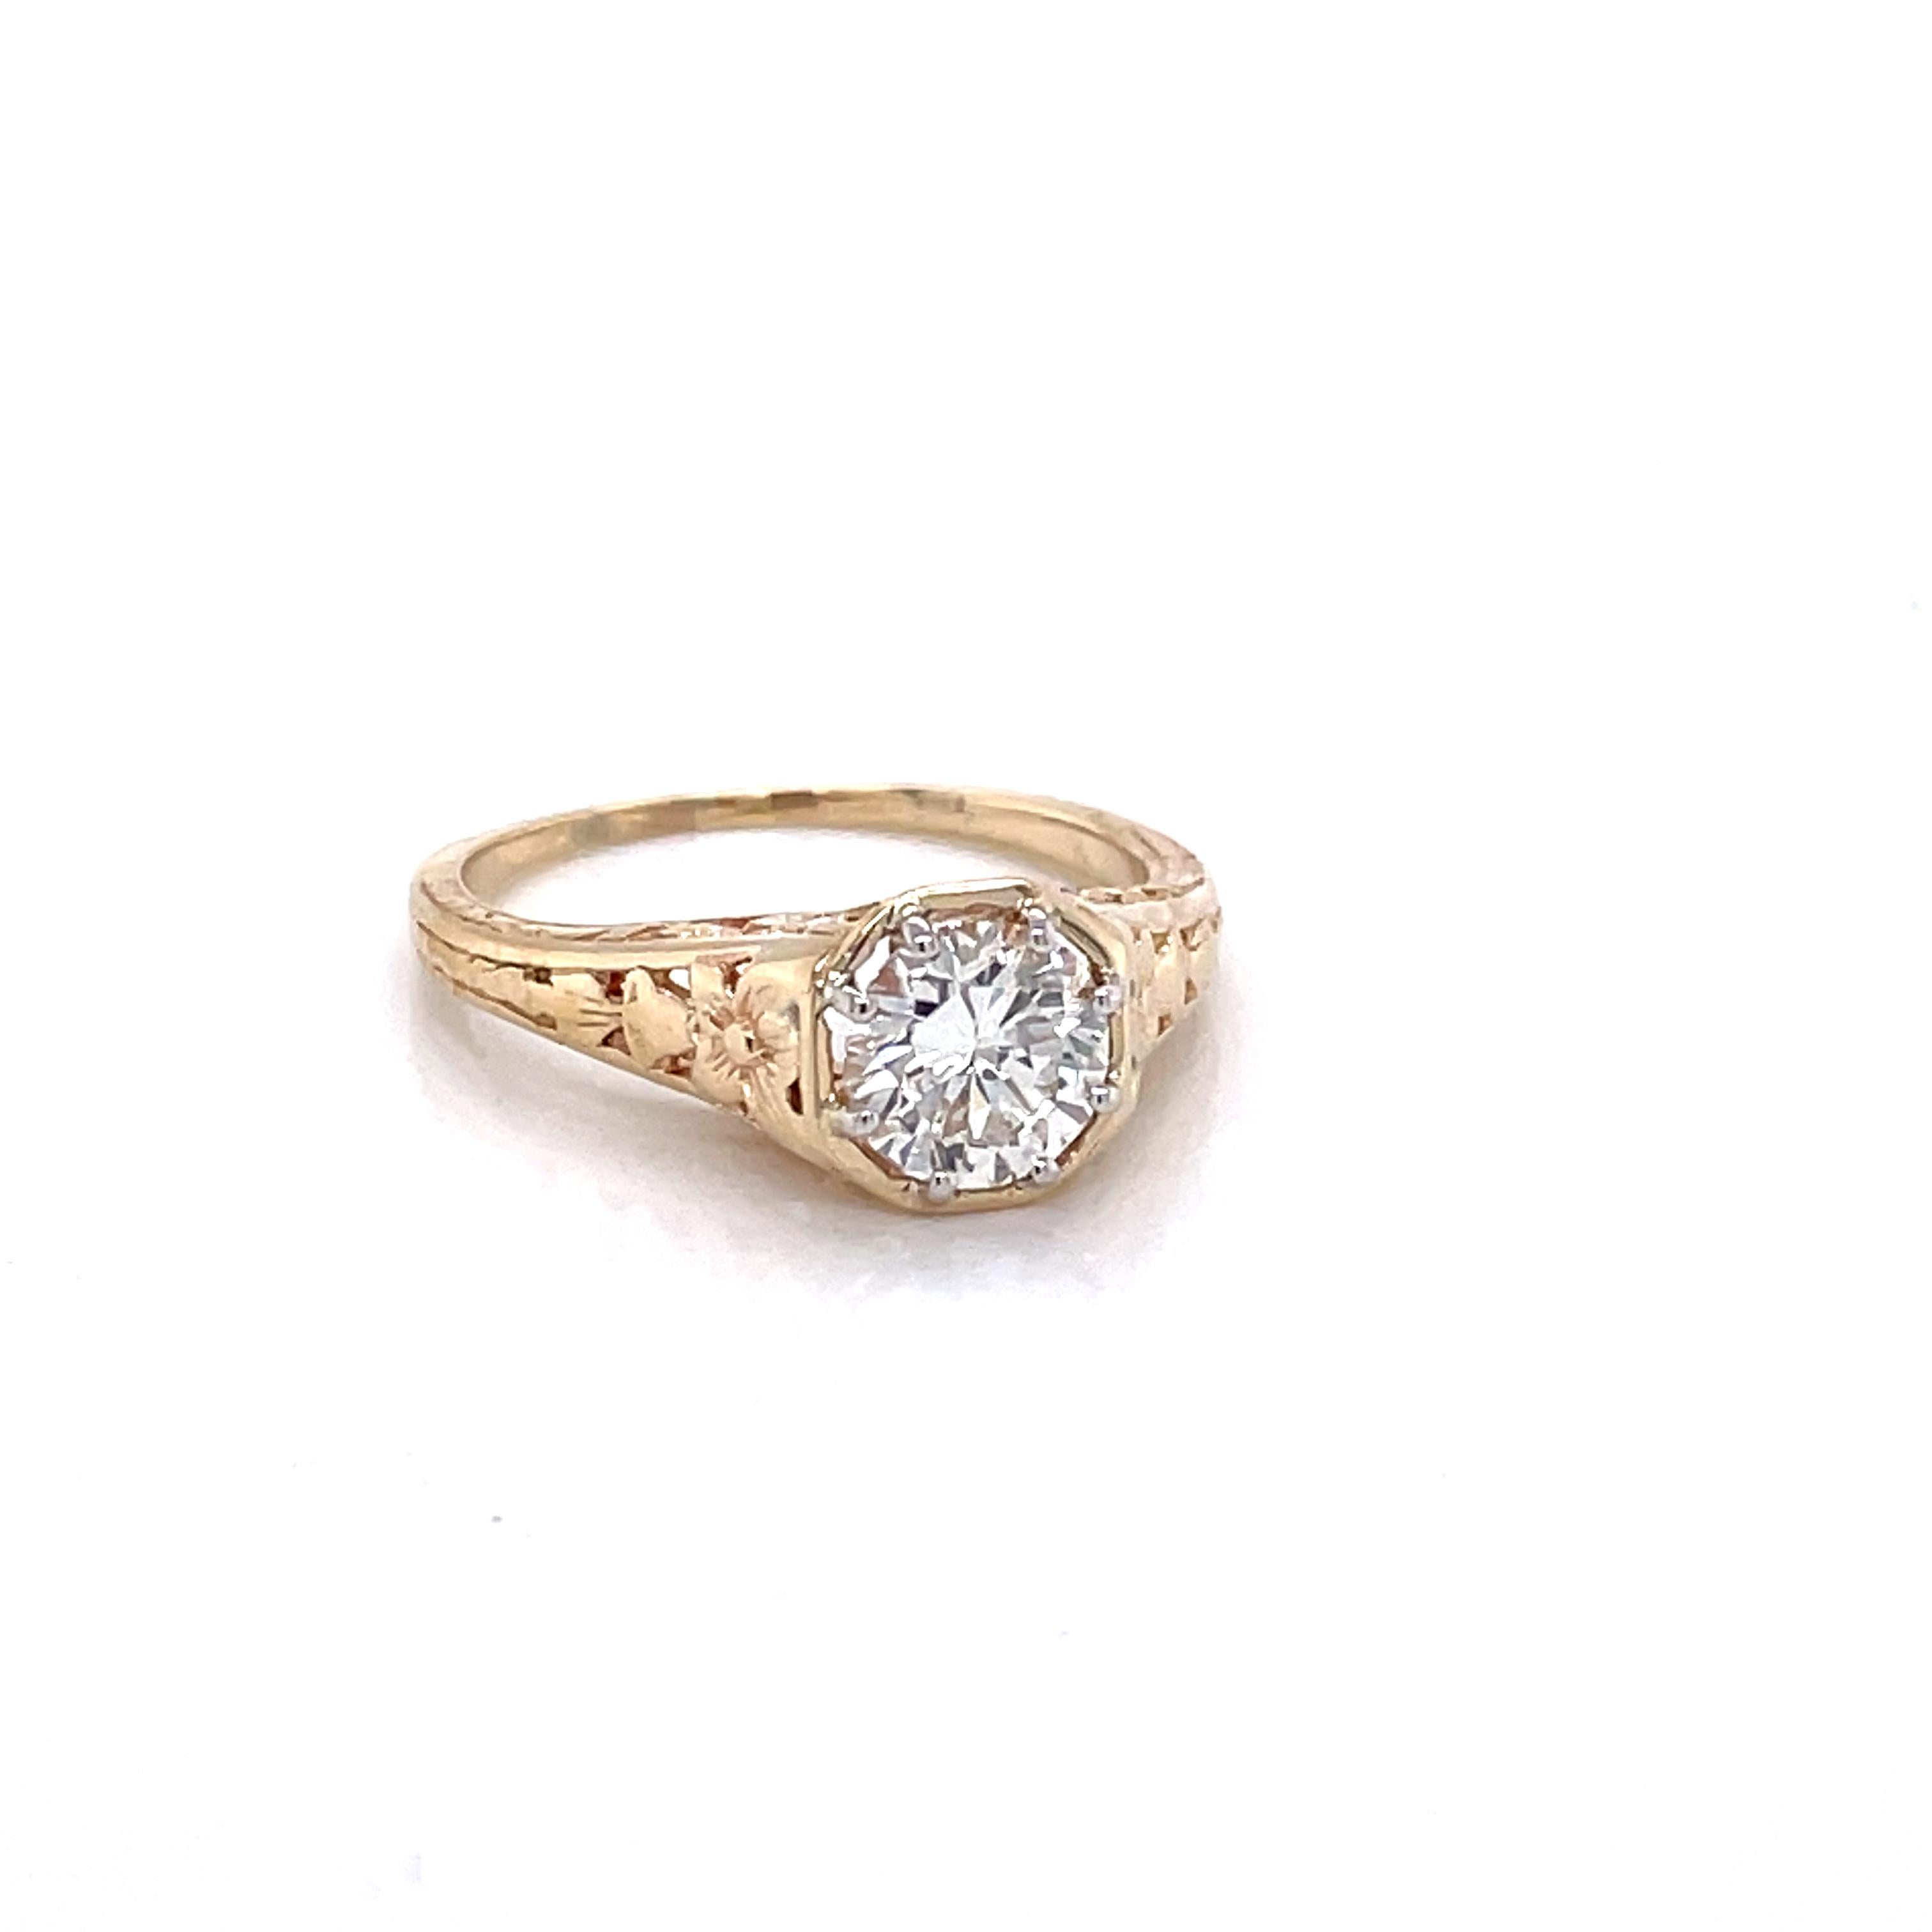 Diamond Solitare Antique 14K Yellow Gold Ring In Good Condition For Sale In Mount Kisco, NY